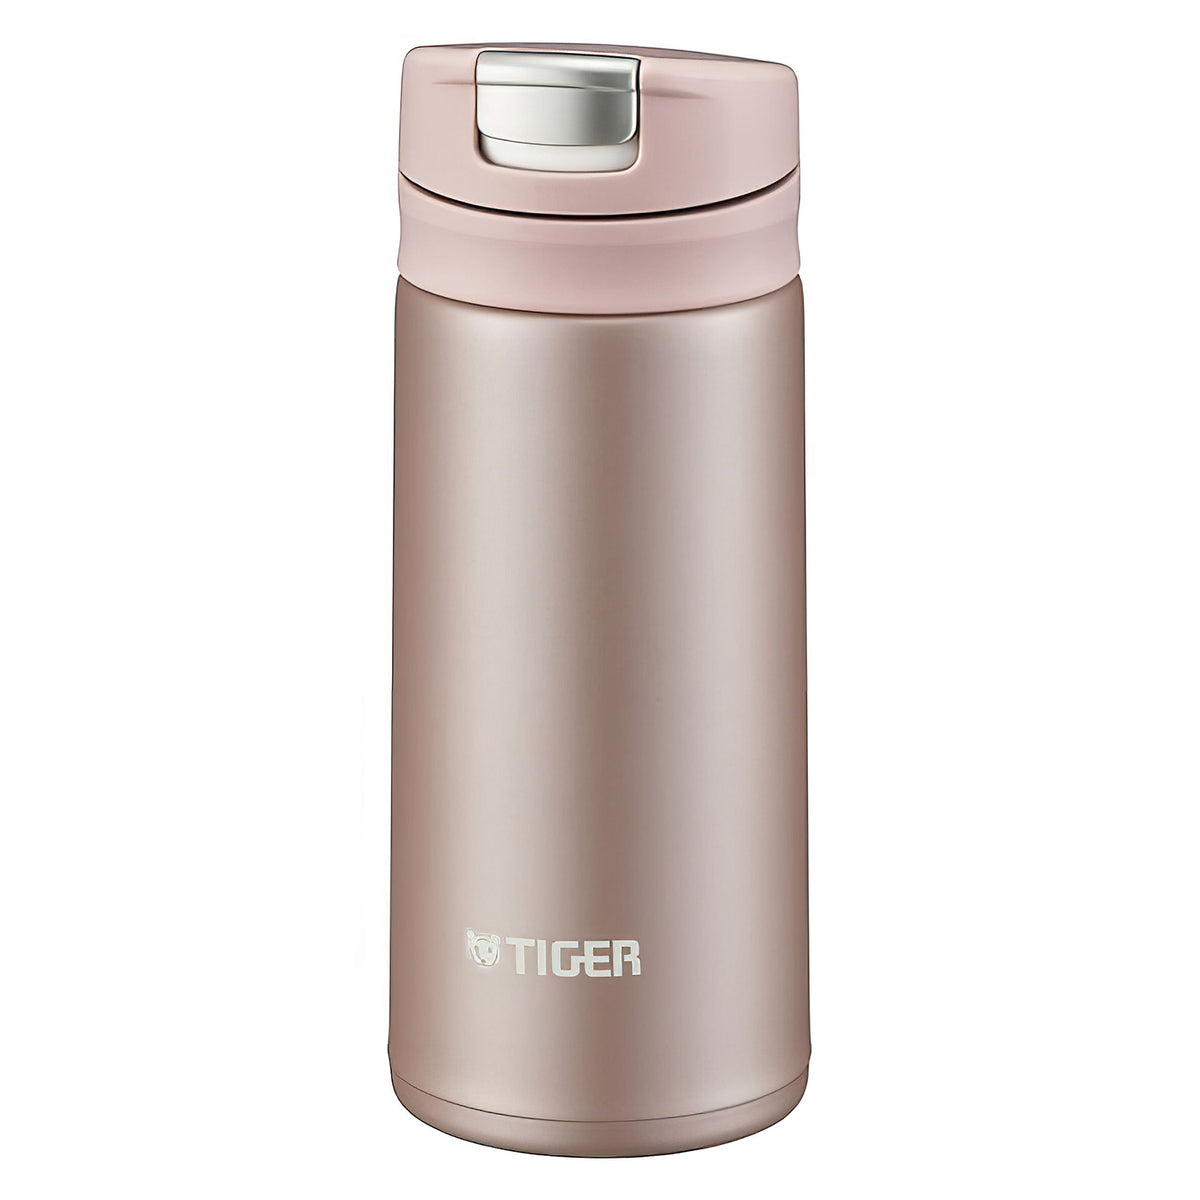 TIGER Tiger Thermos Insulated Lunch Box Stainless Steel Lunch Jar